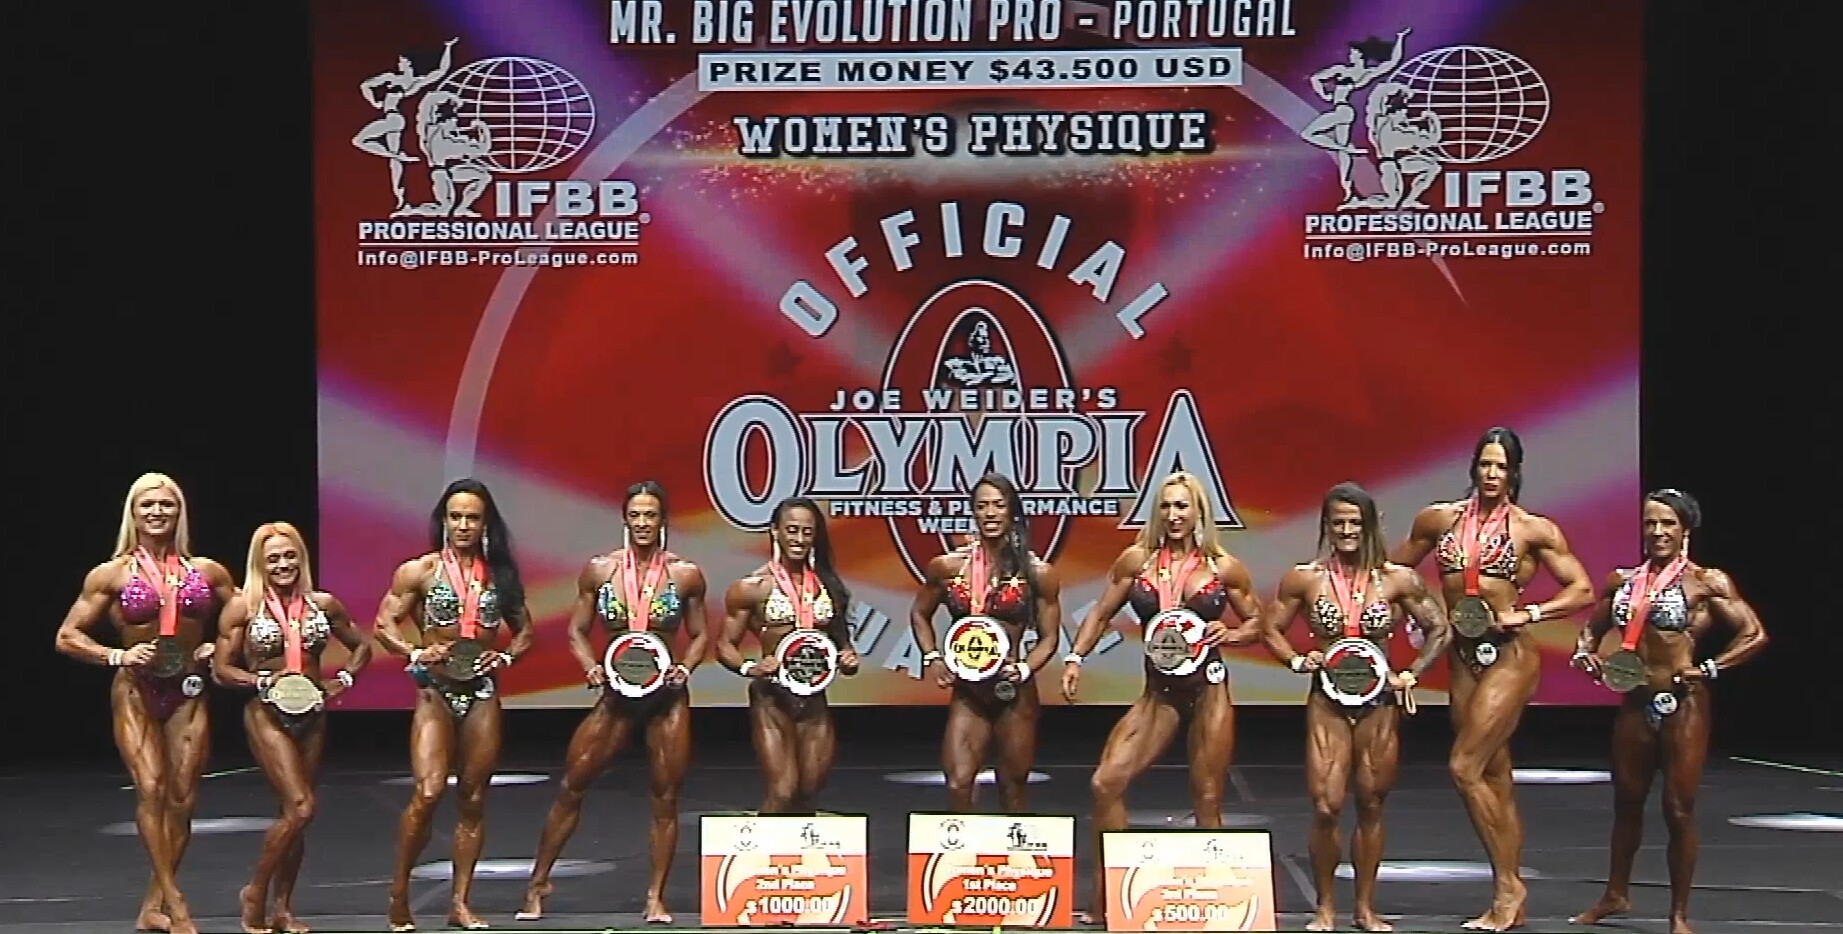 Physique winners